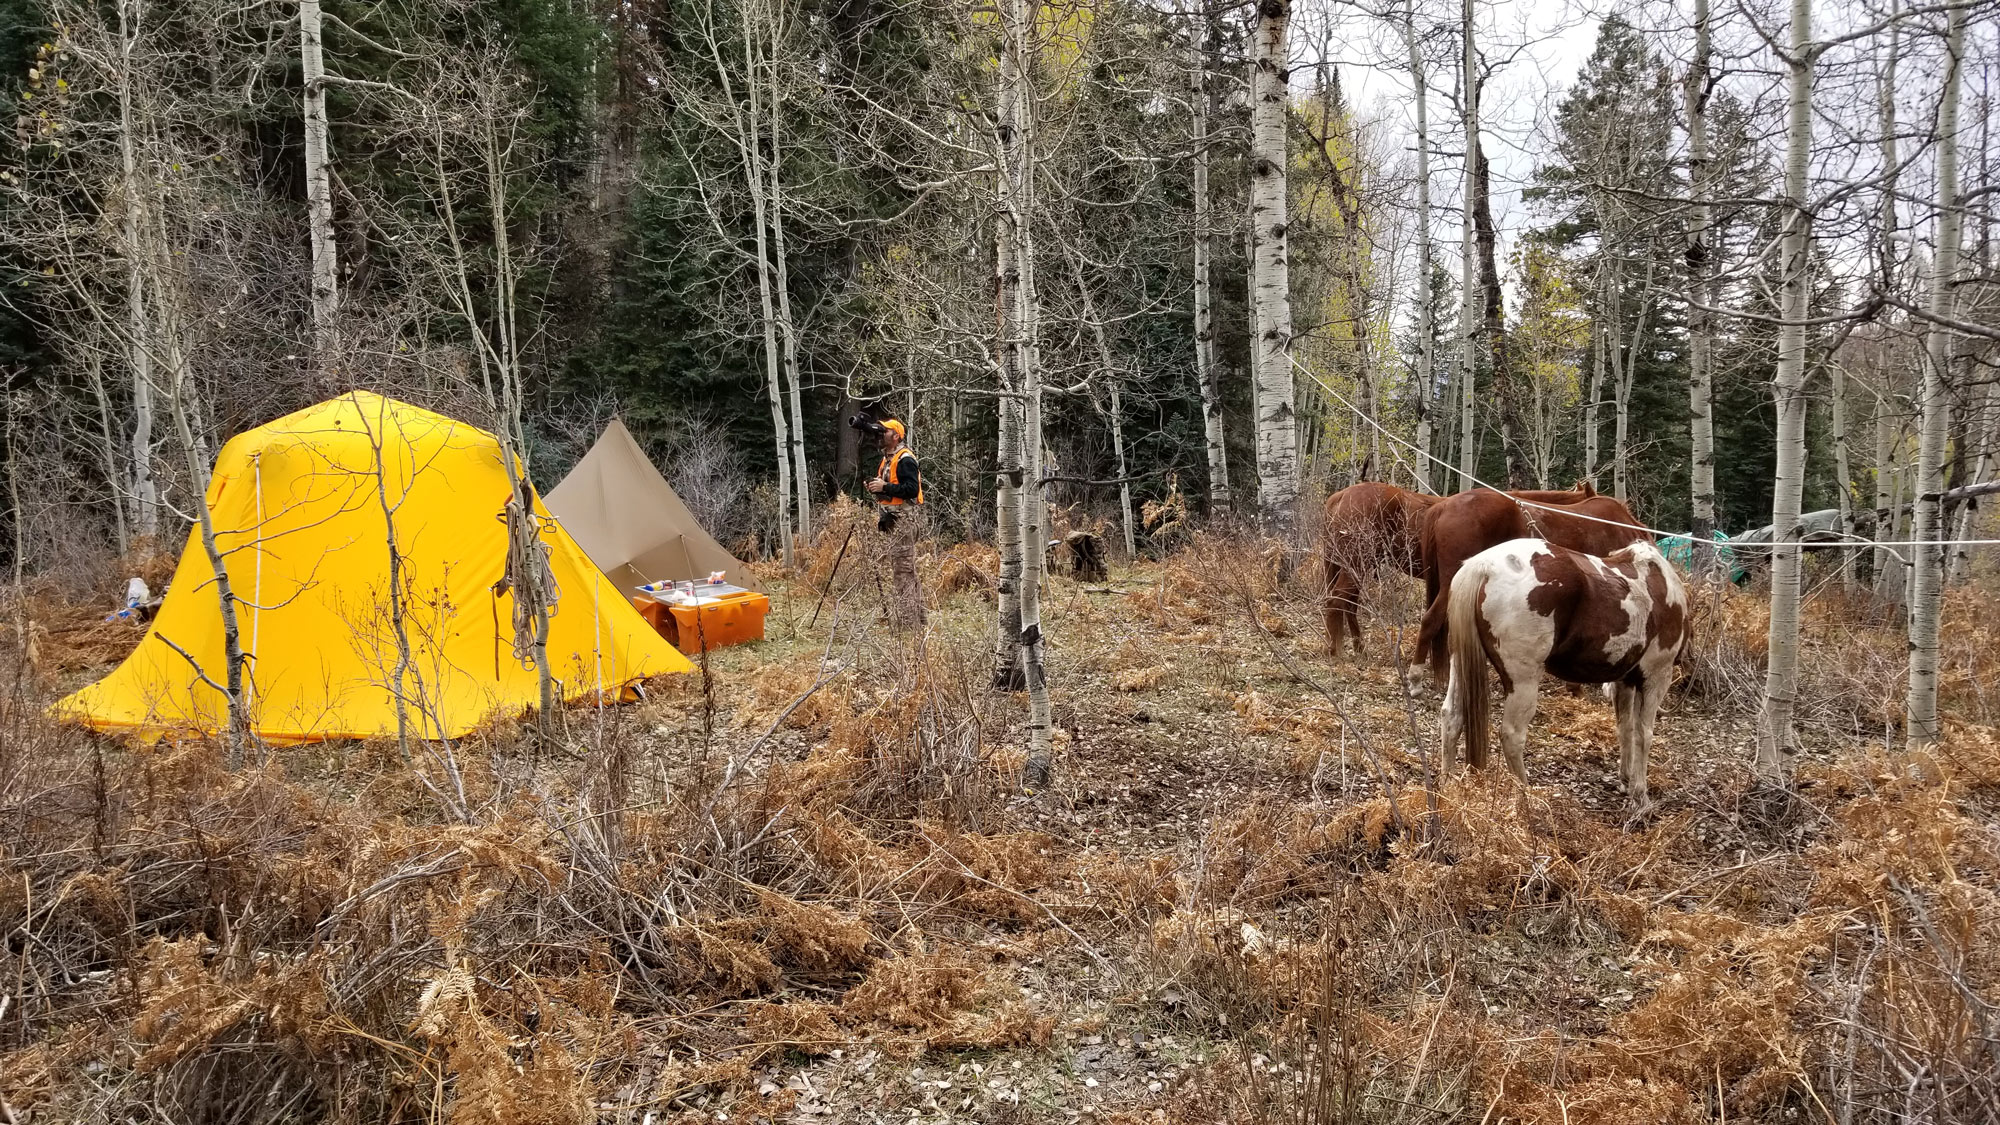 glassing from camp while horse hunting